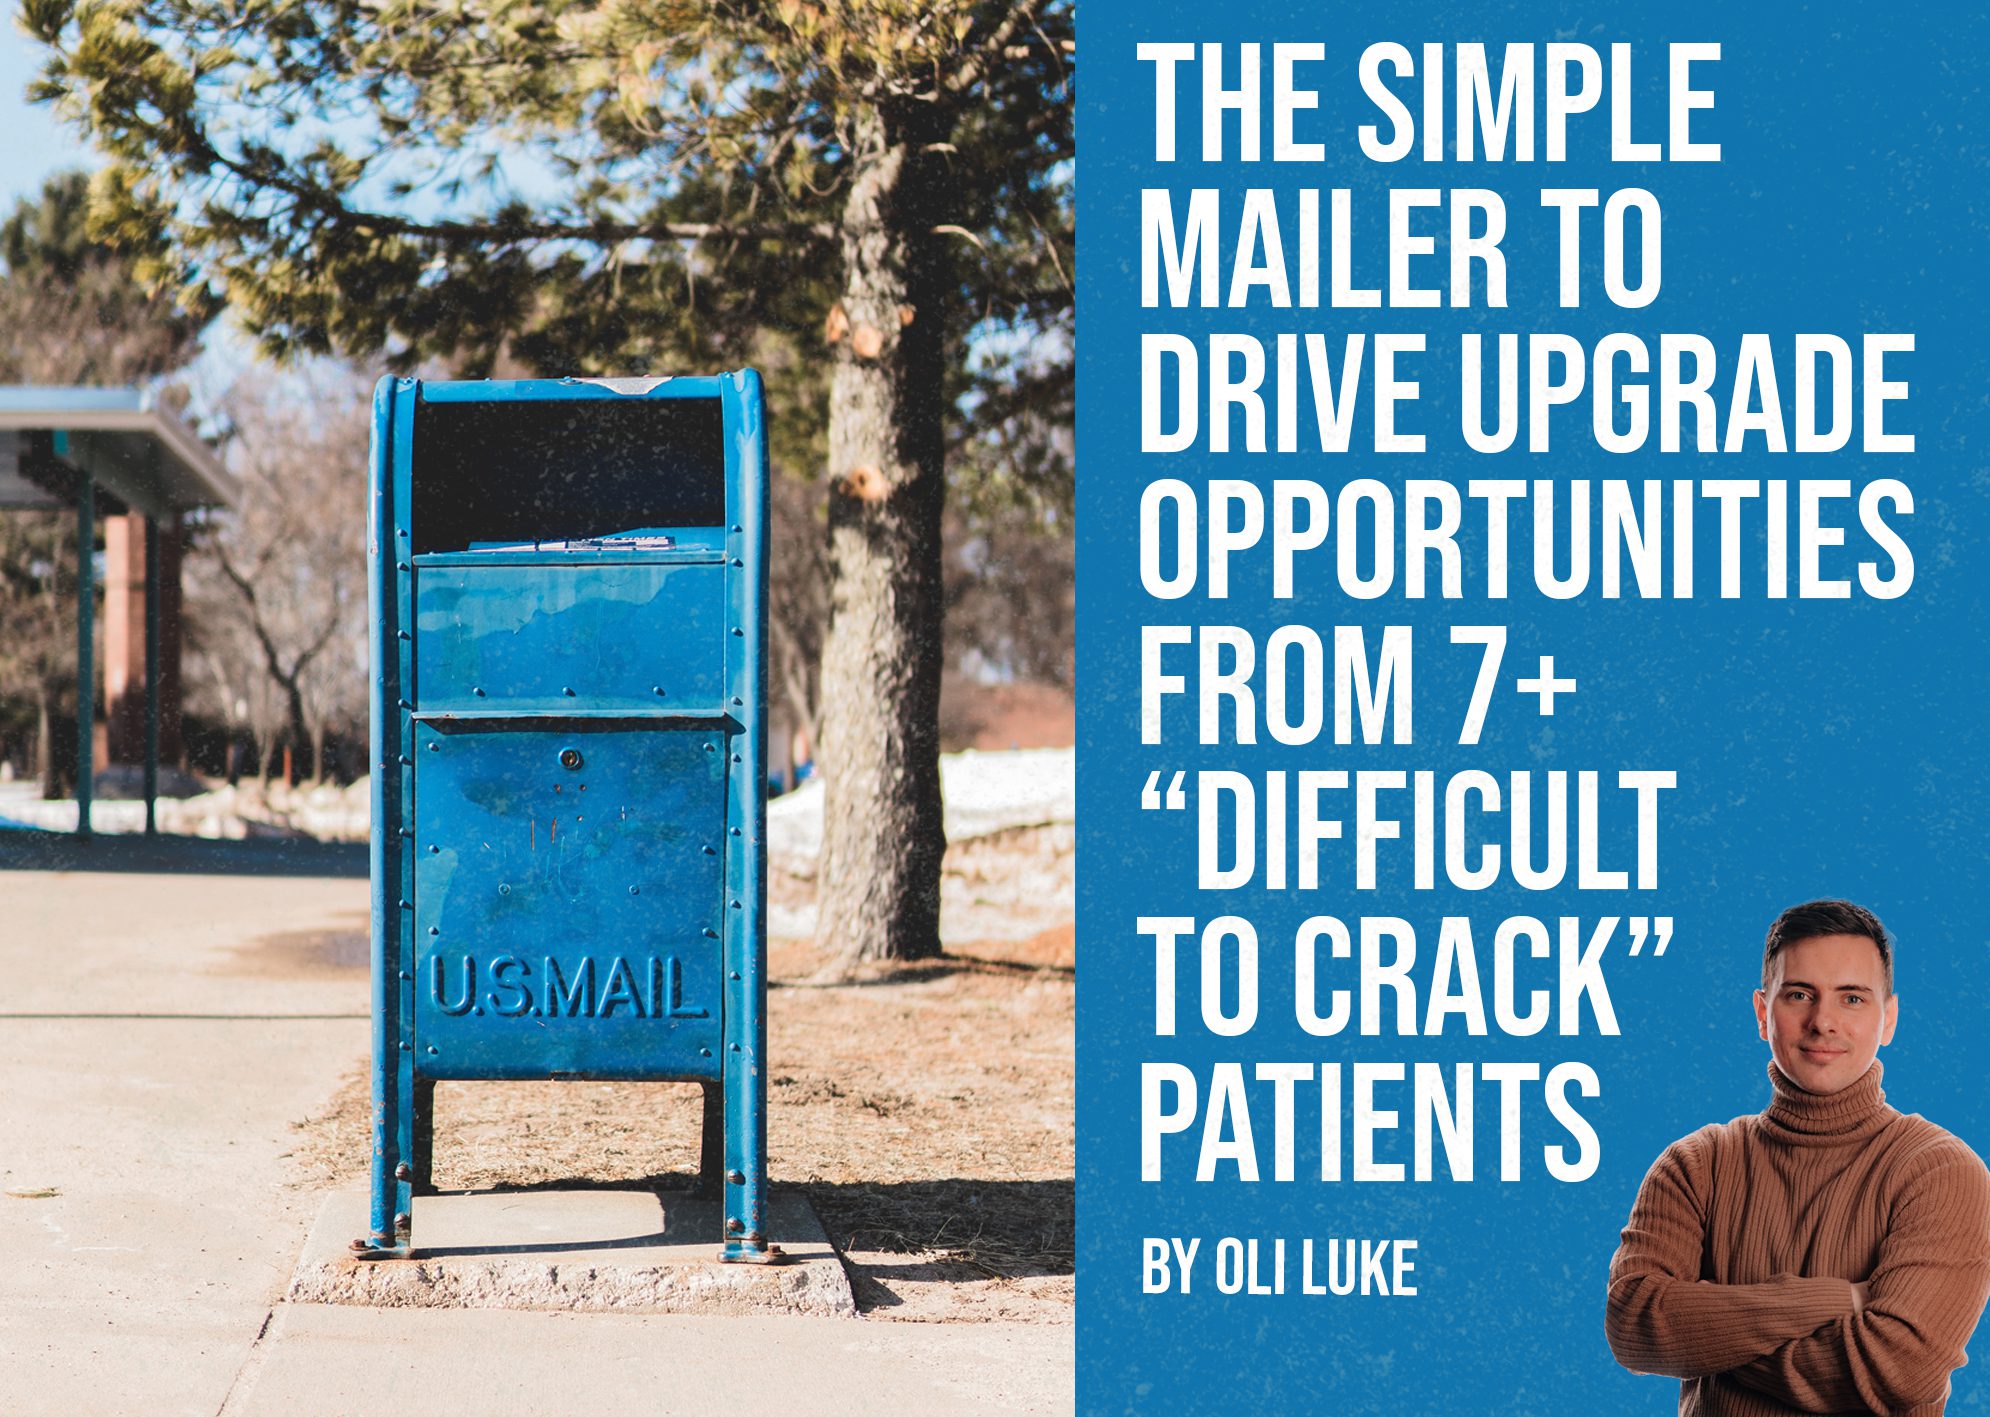 The_Simple_Mailer_to_-Drive_Upgrade_Opportunities_from_7_“Difficult_-to_Crack”_Patients